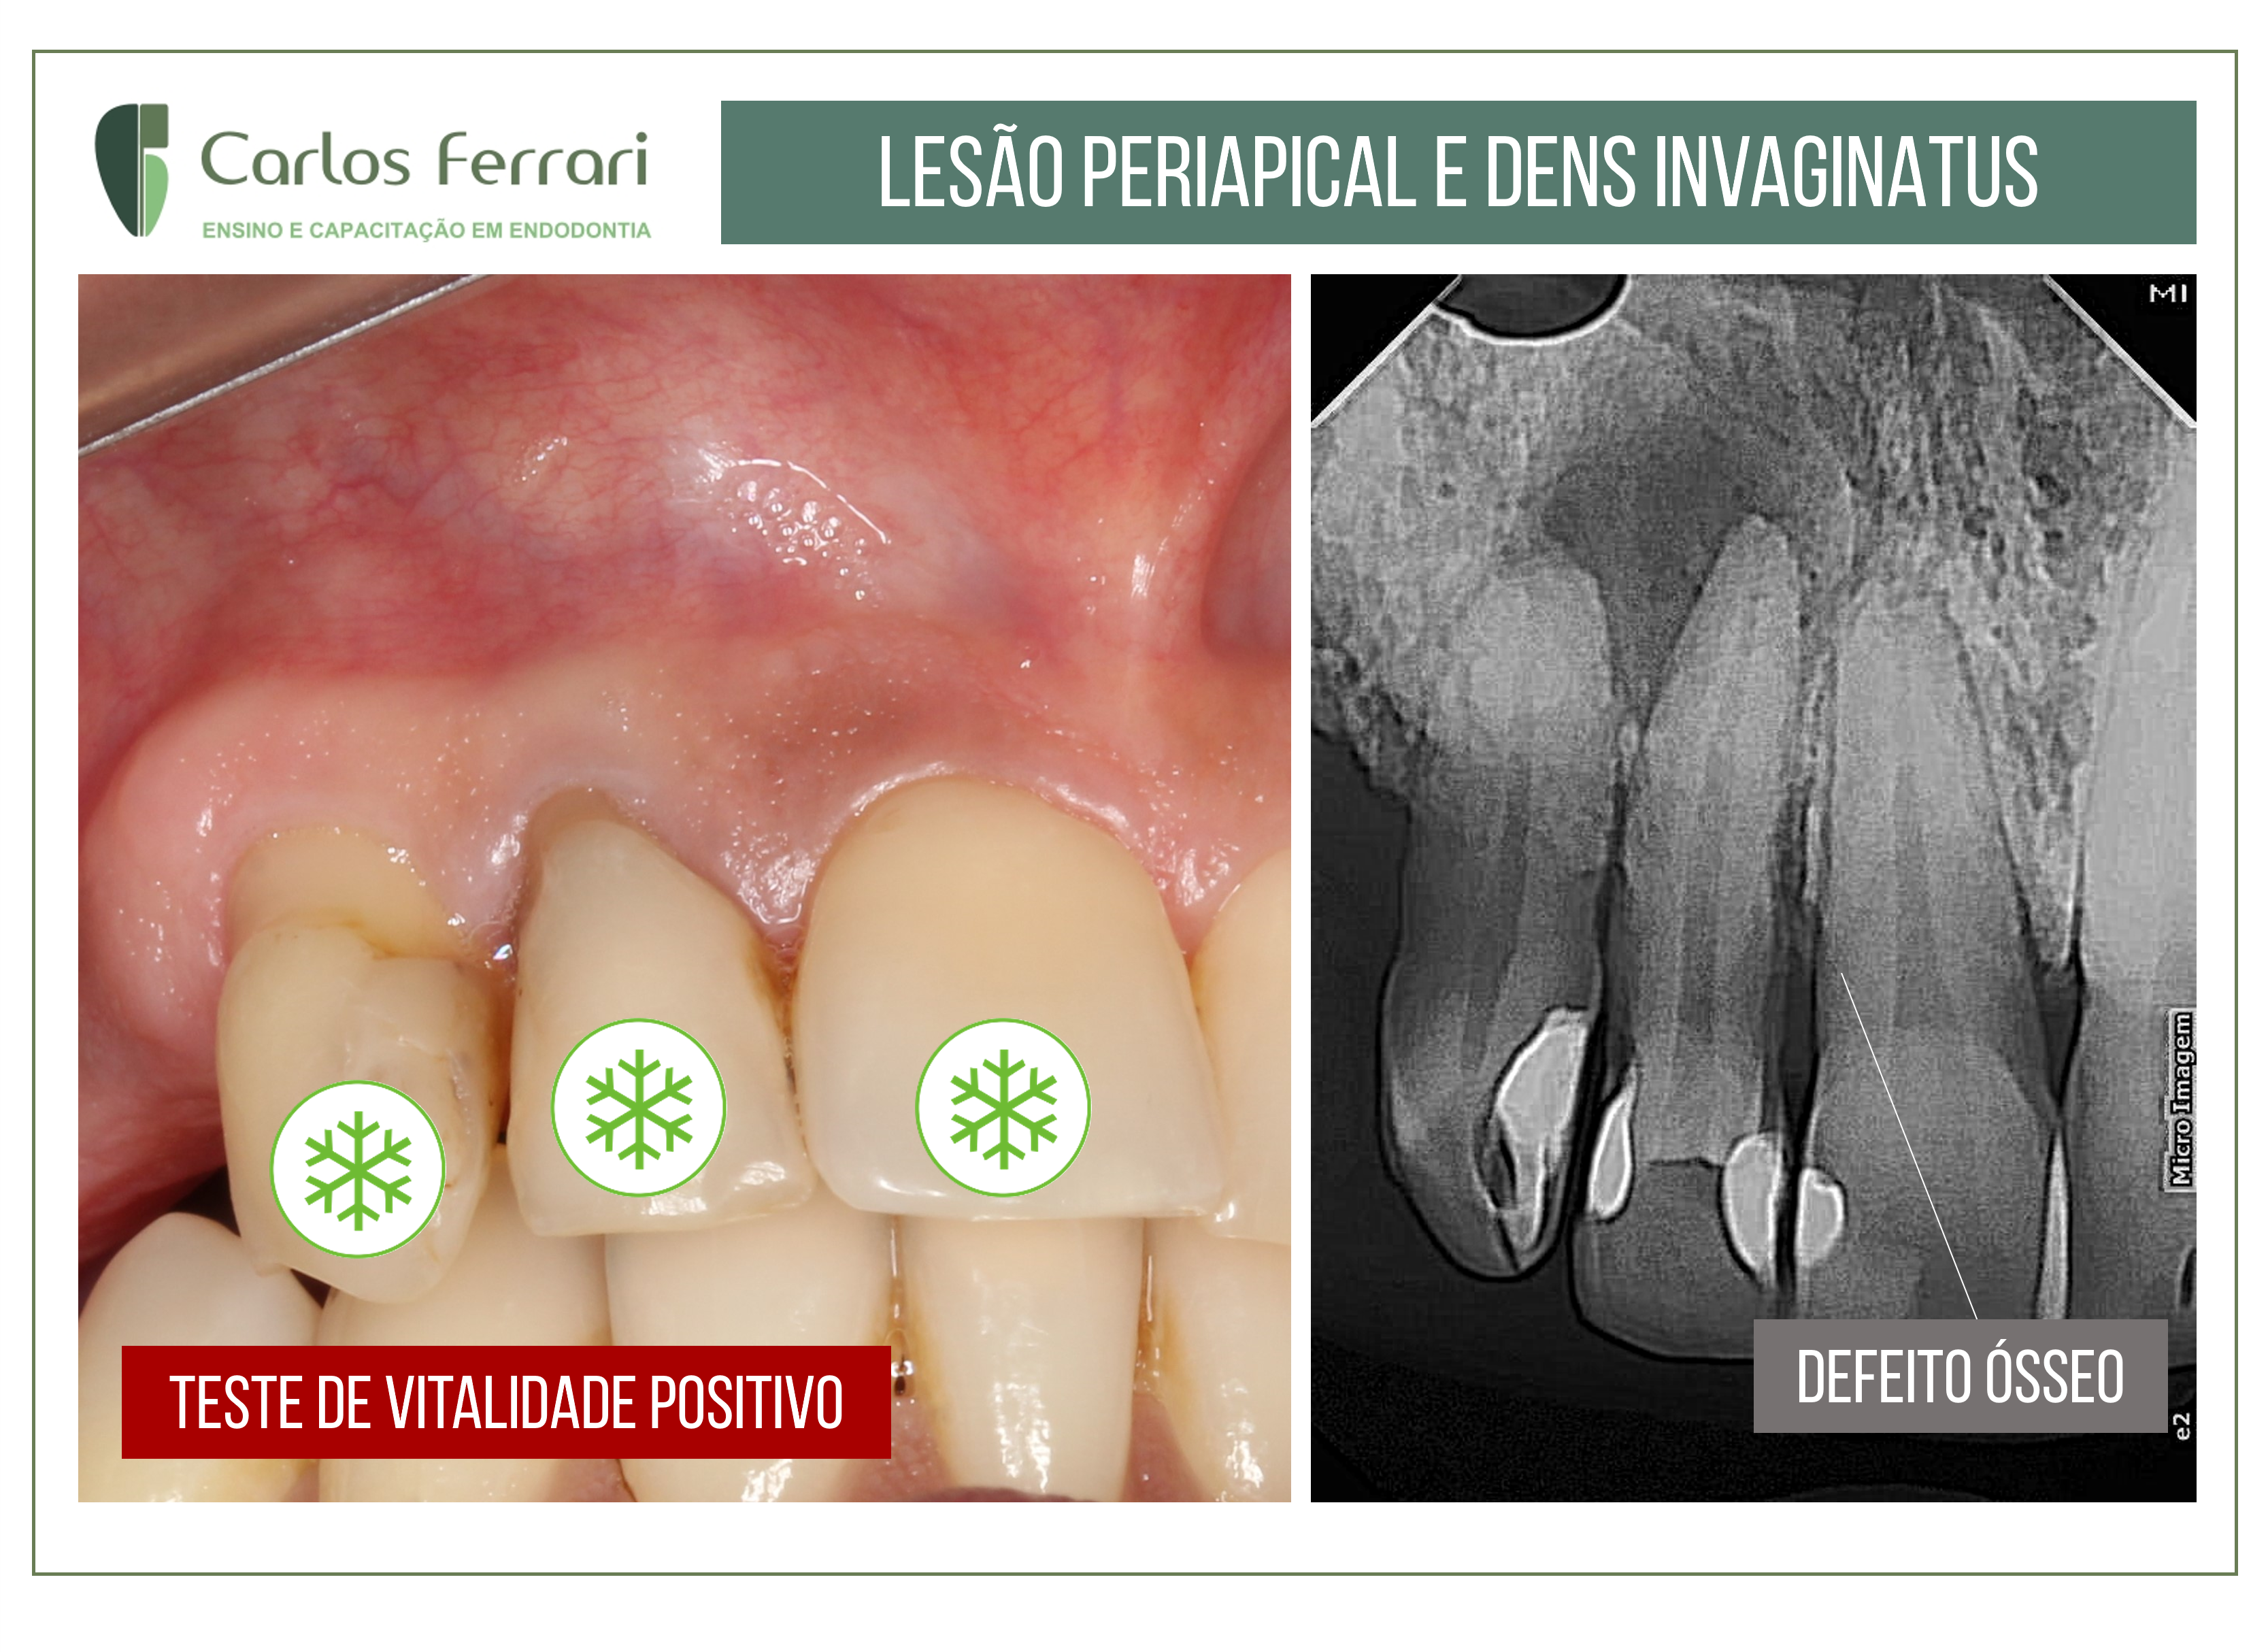 You are currently viewing Periapical lesion and dens invaginatus.